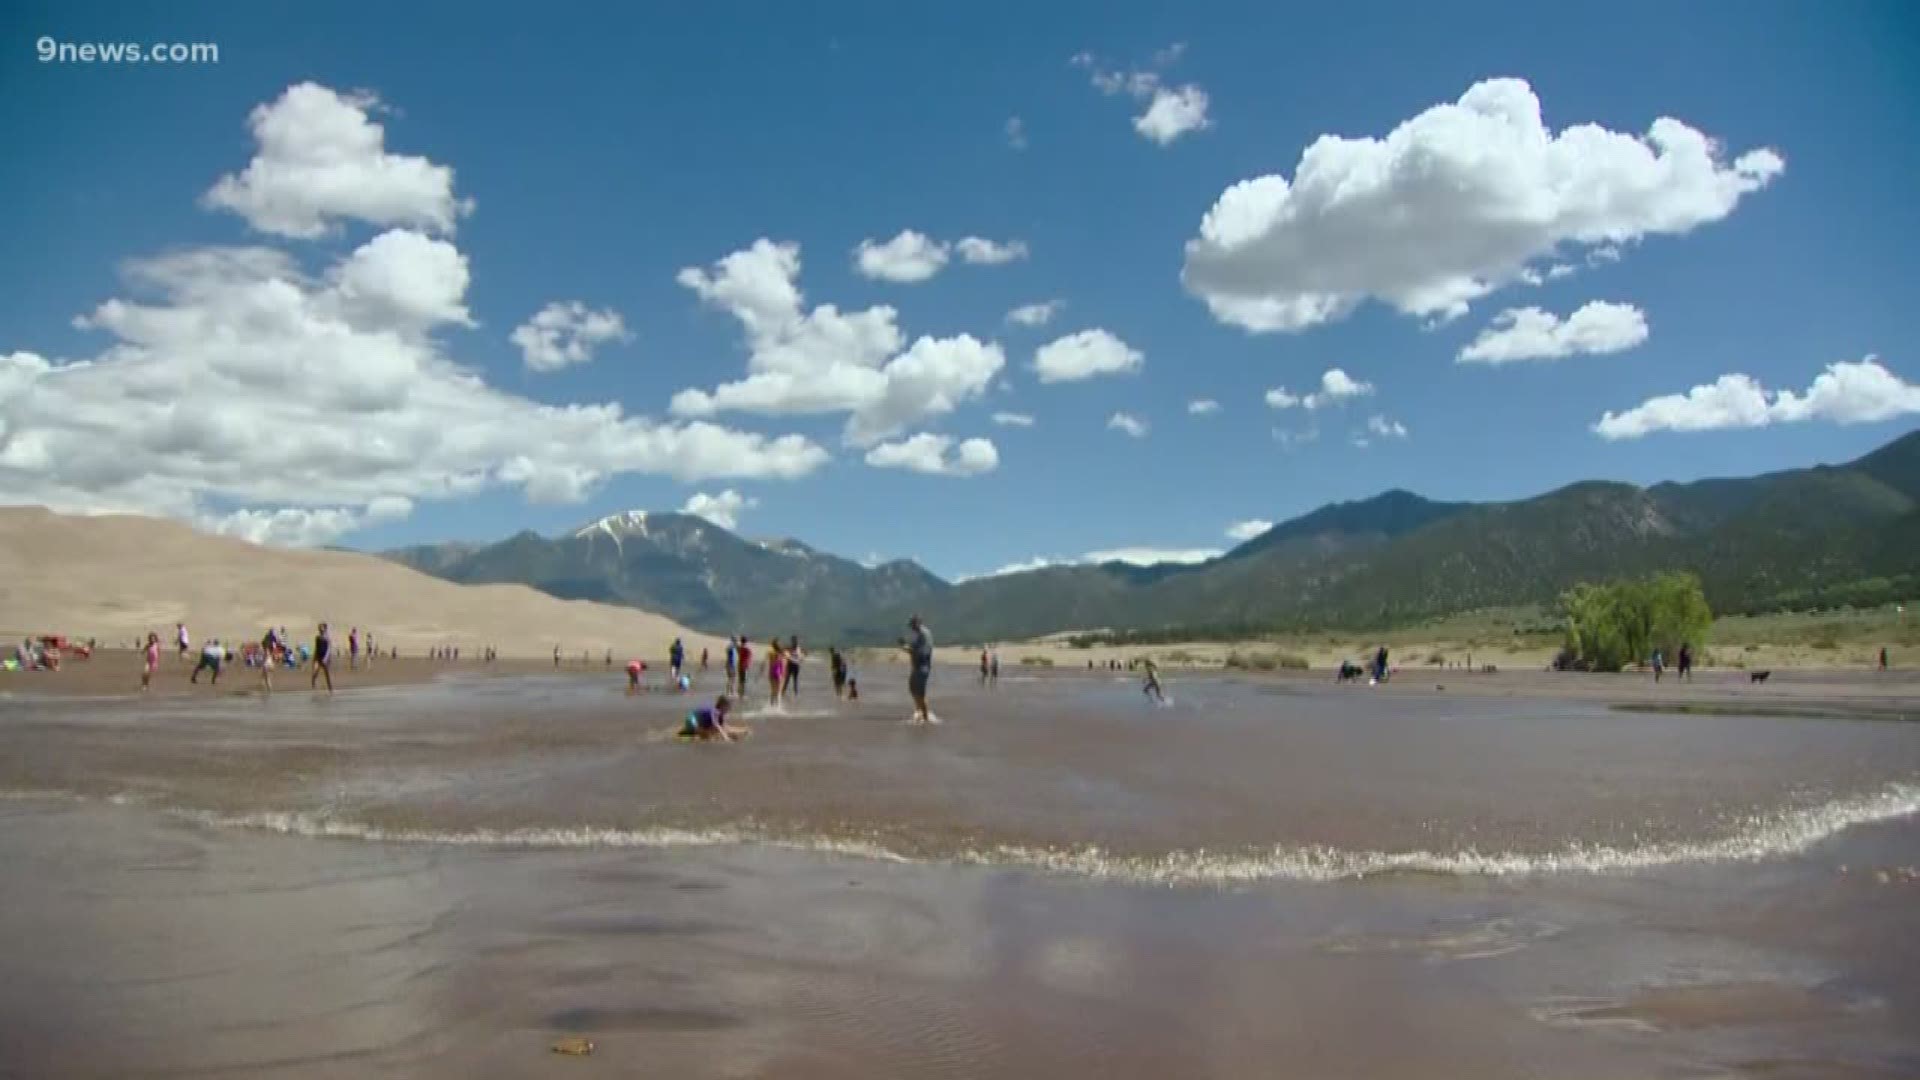 For our "9Adventures" series, we take your suggestions and visit some of the most amazing places in Colorado. First stop on the list: Great Sand Dunes National Park and Preserve.